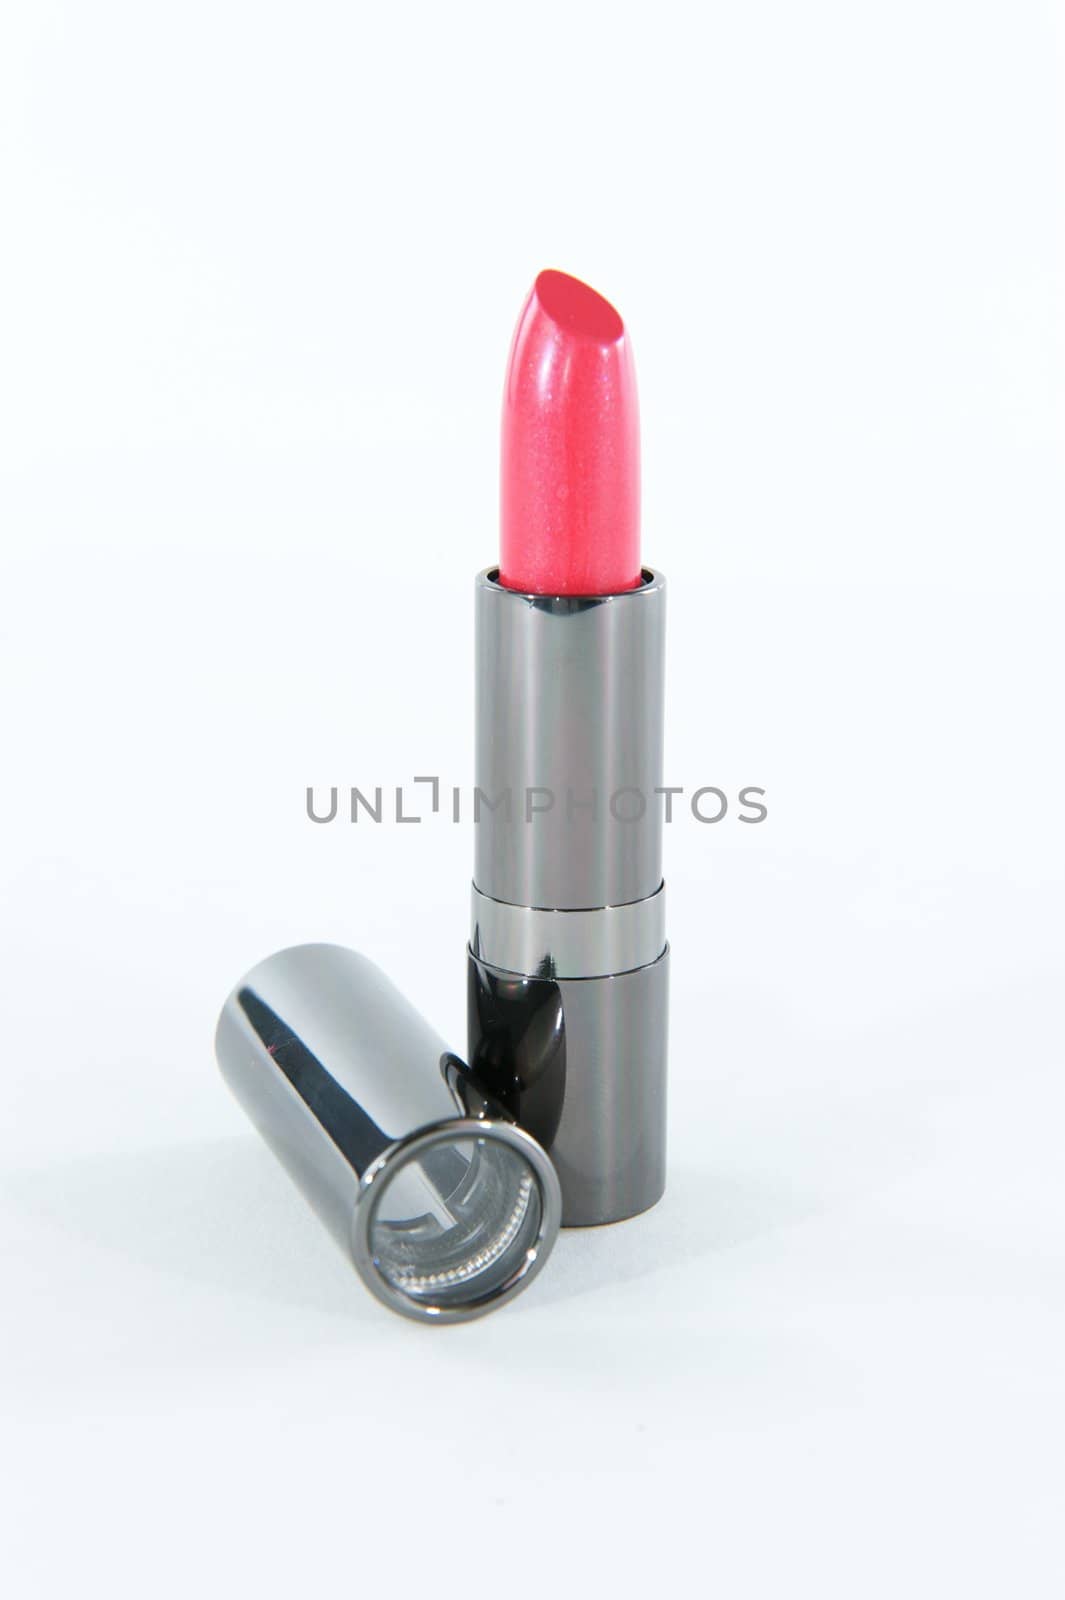 Single Pink Lipstick Case With the Top Off by pixelsnap